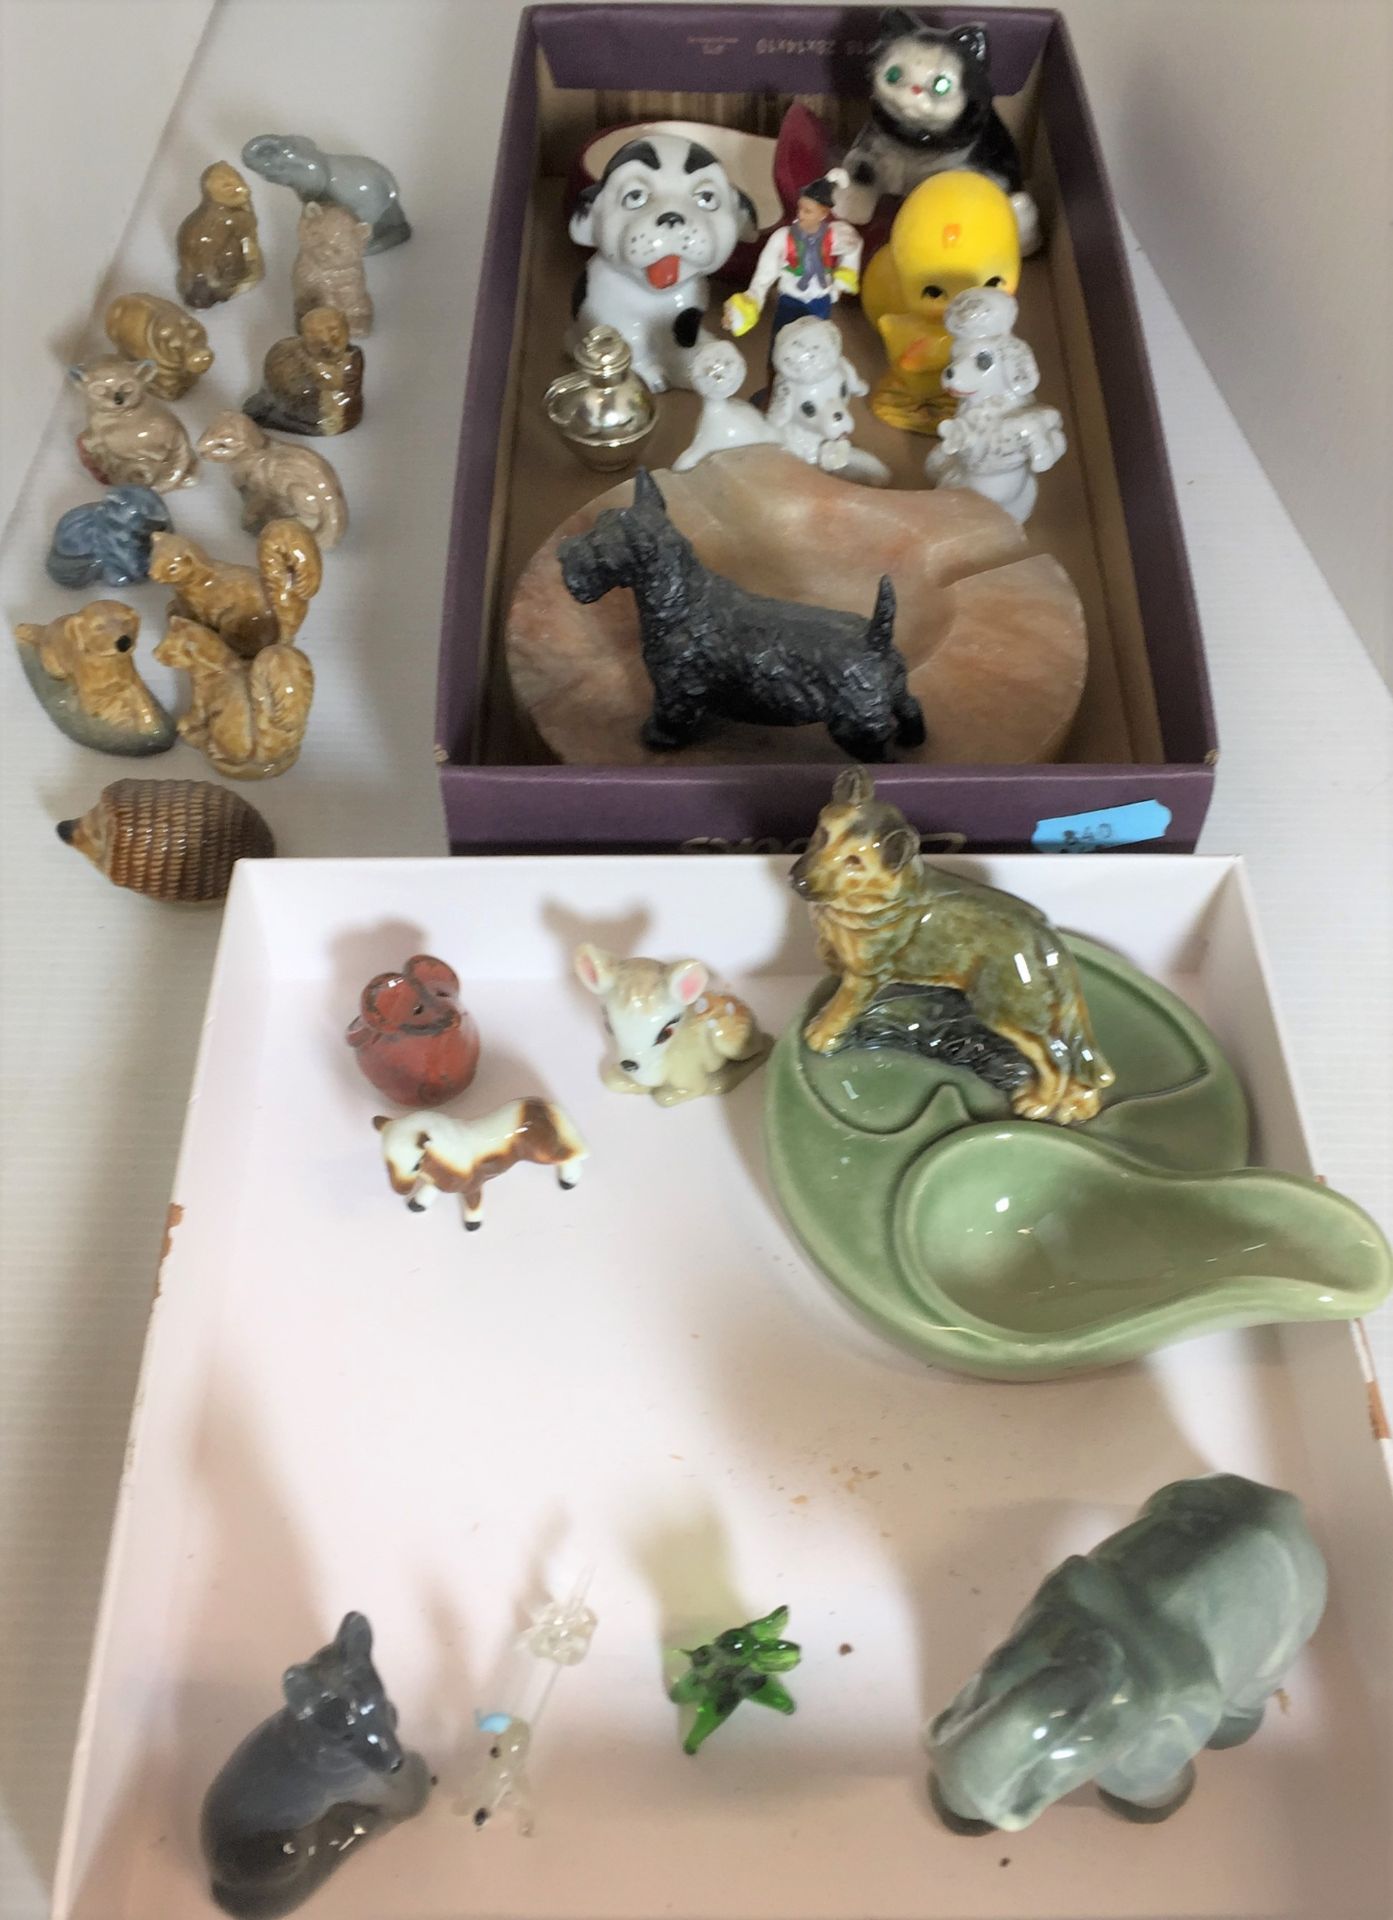 Contents to two lids - twenty five plus items including twelve Wade miniature animals and dog spoon